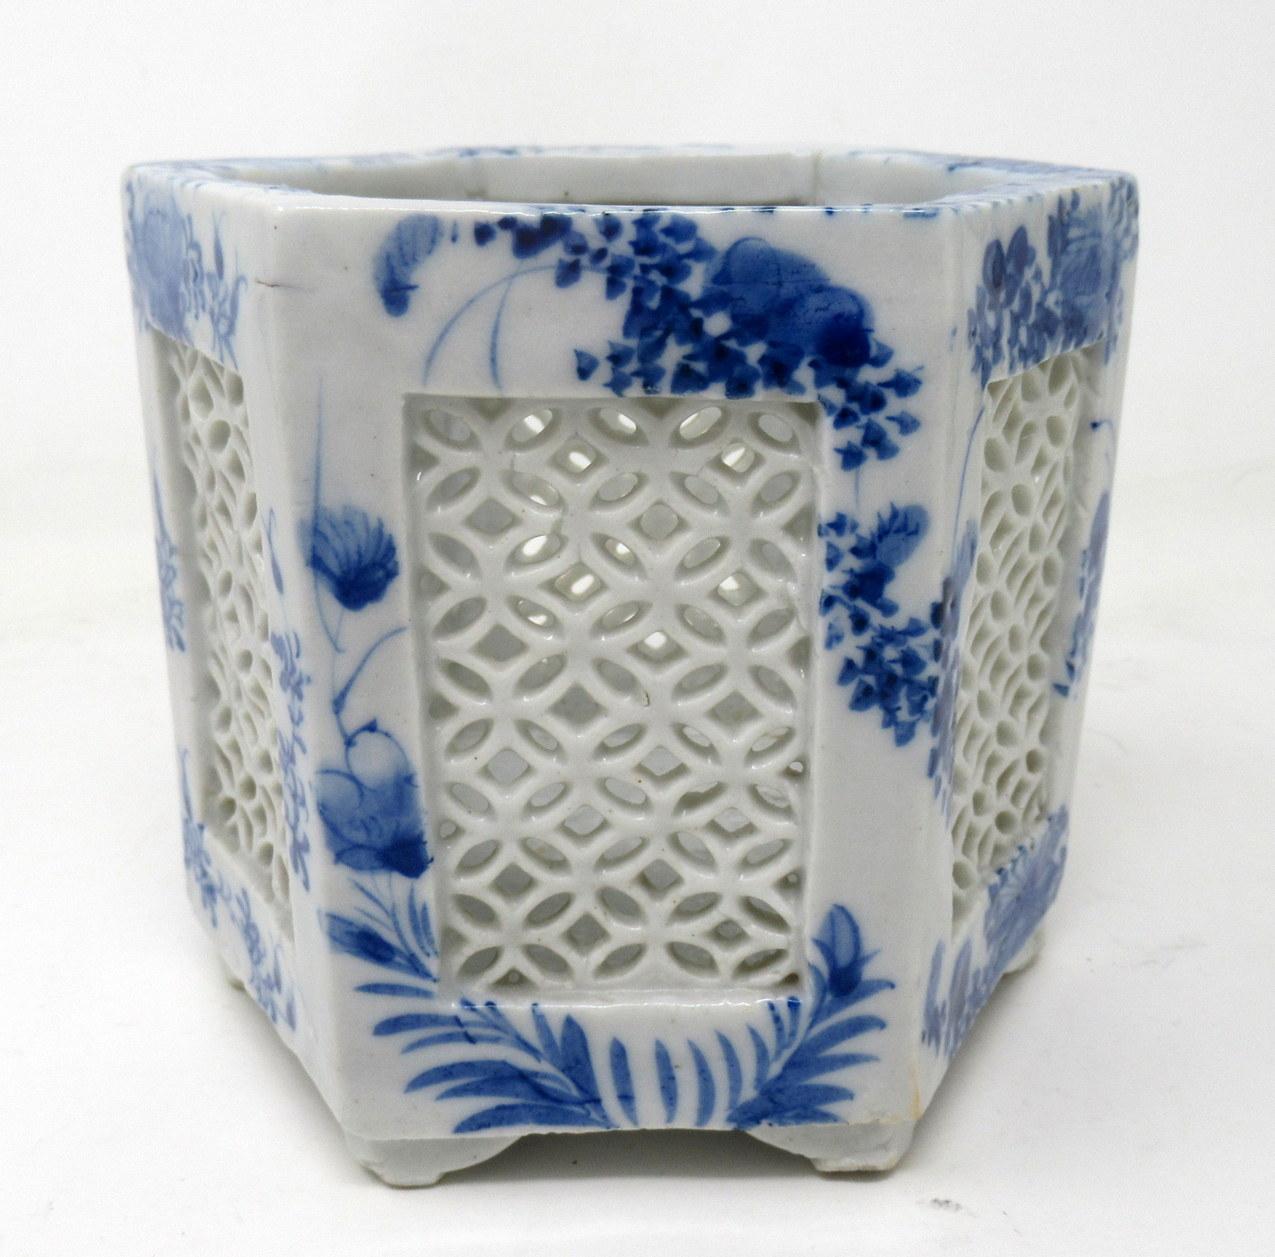 20th Century Antique Blue White Japanese Chinese Export Reticulated Hexagonal Porcelain Vase